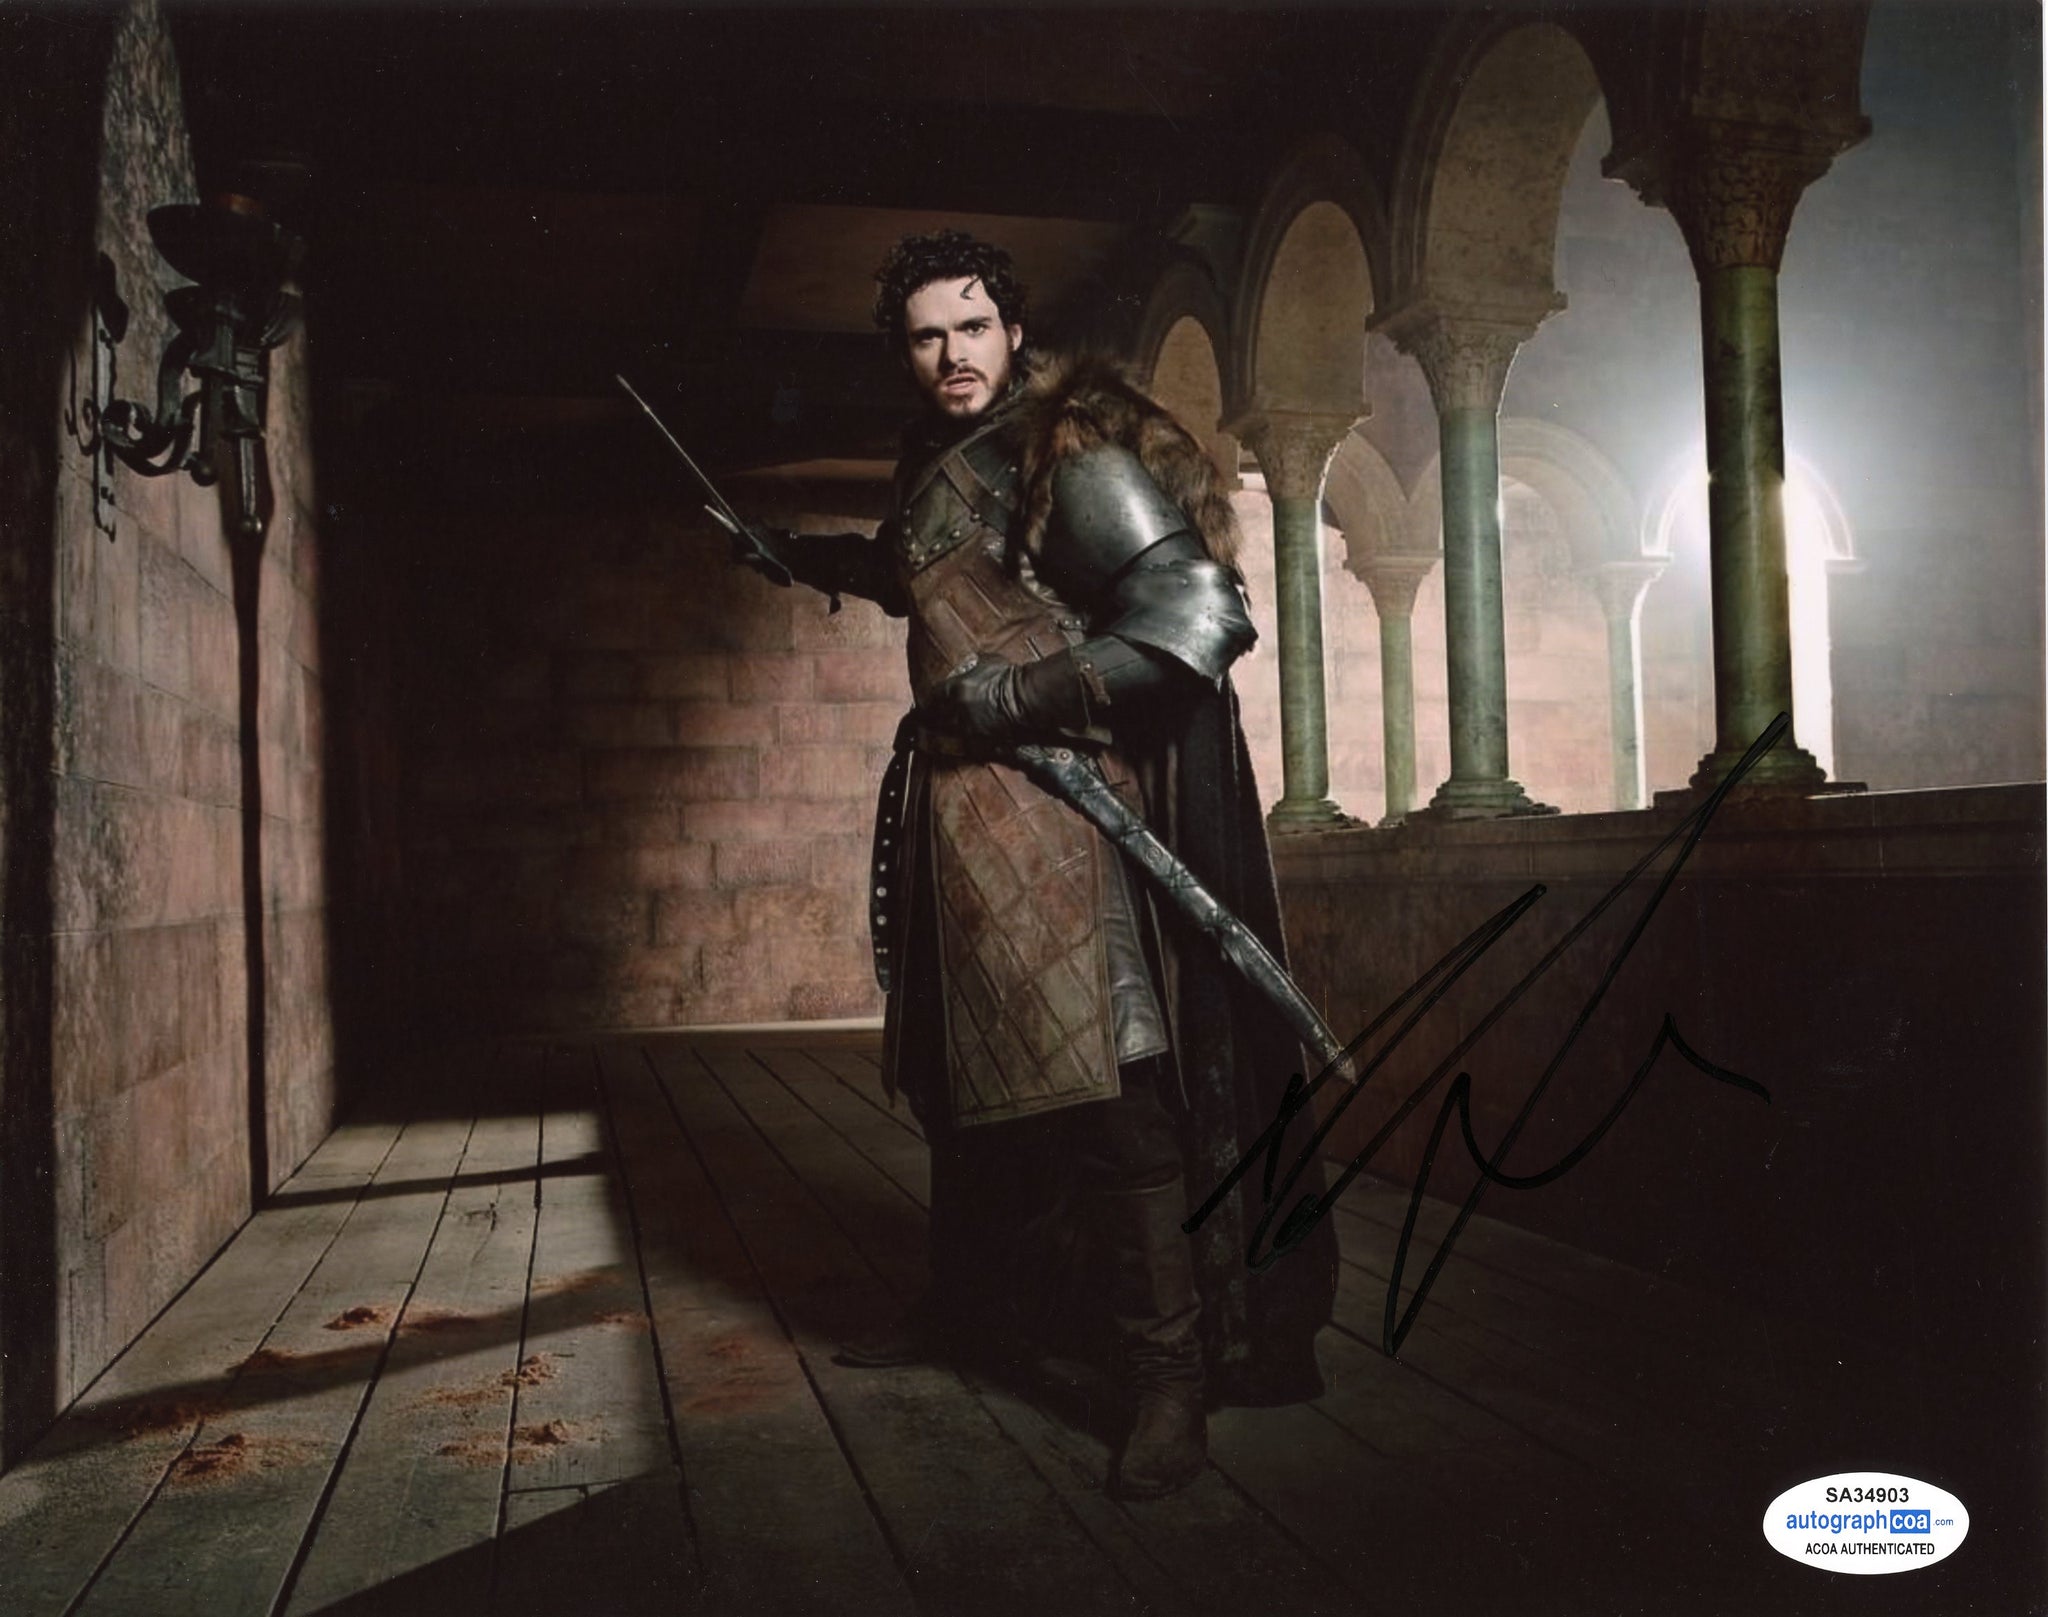 Richard Madden Game of Thrones Signed Autograph 8x10 Photo ACOA #9 - Outlaw Hobbies Authentic Autographs